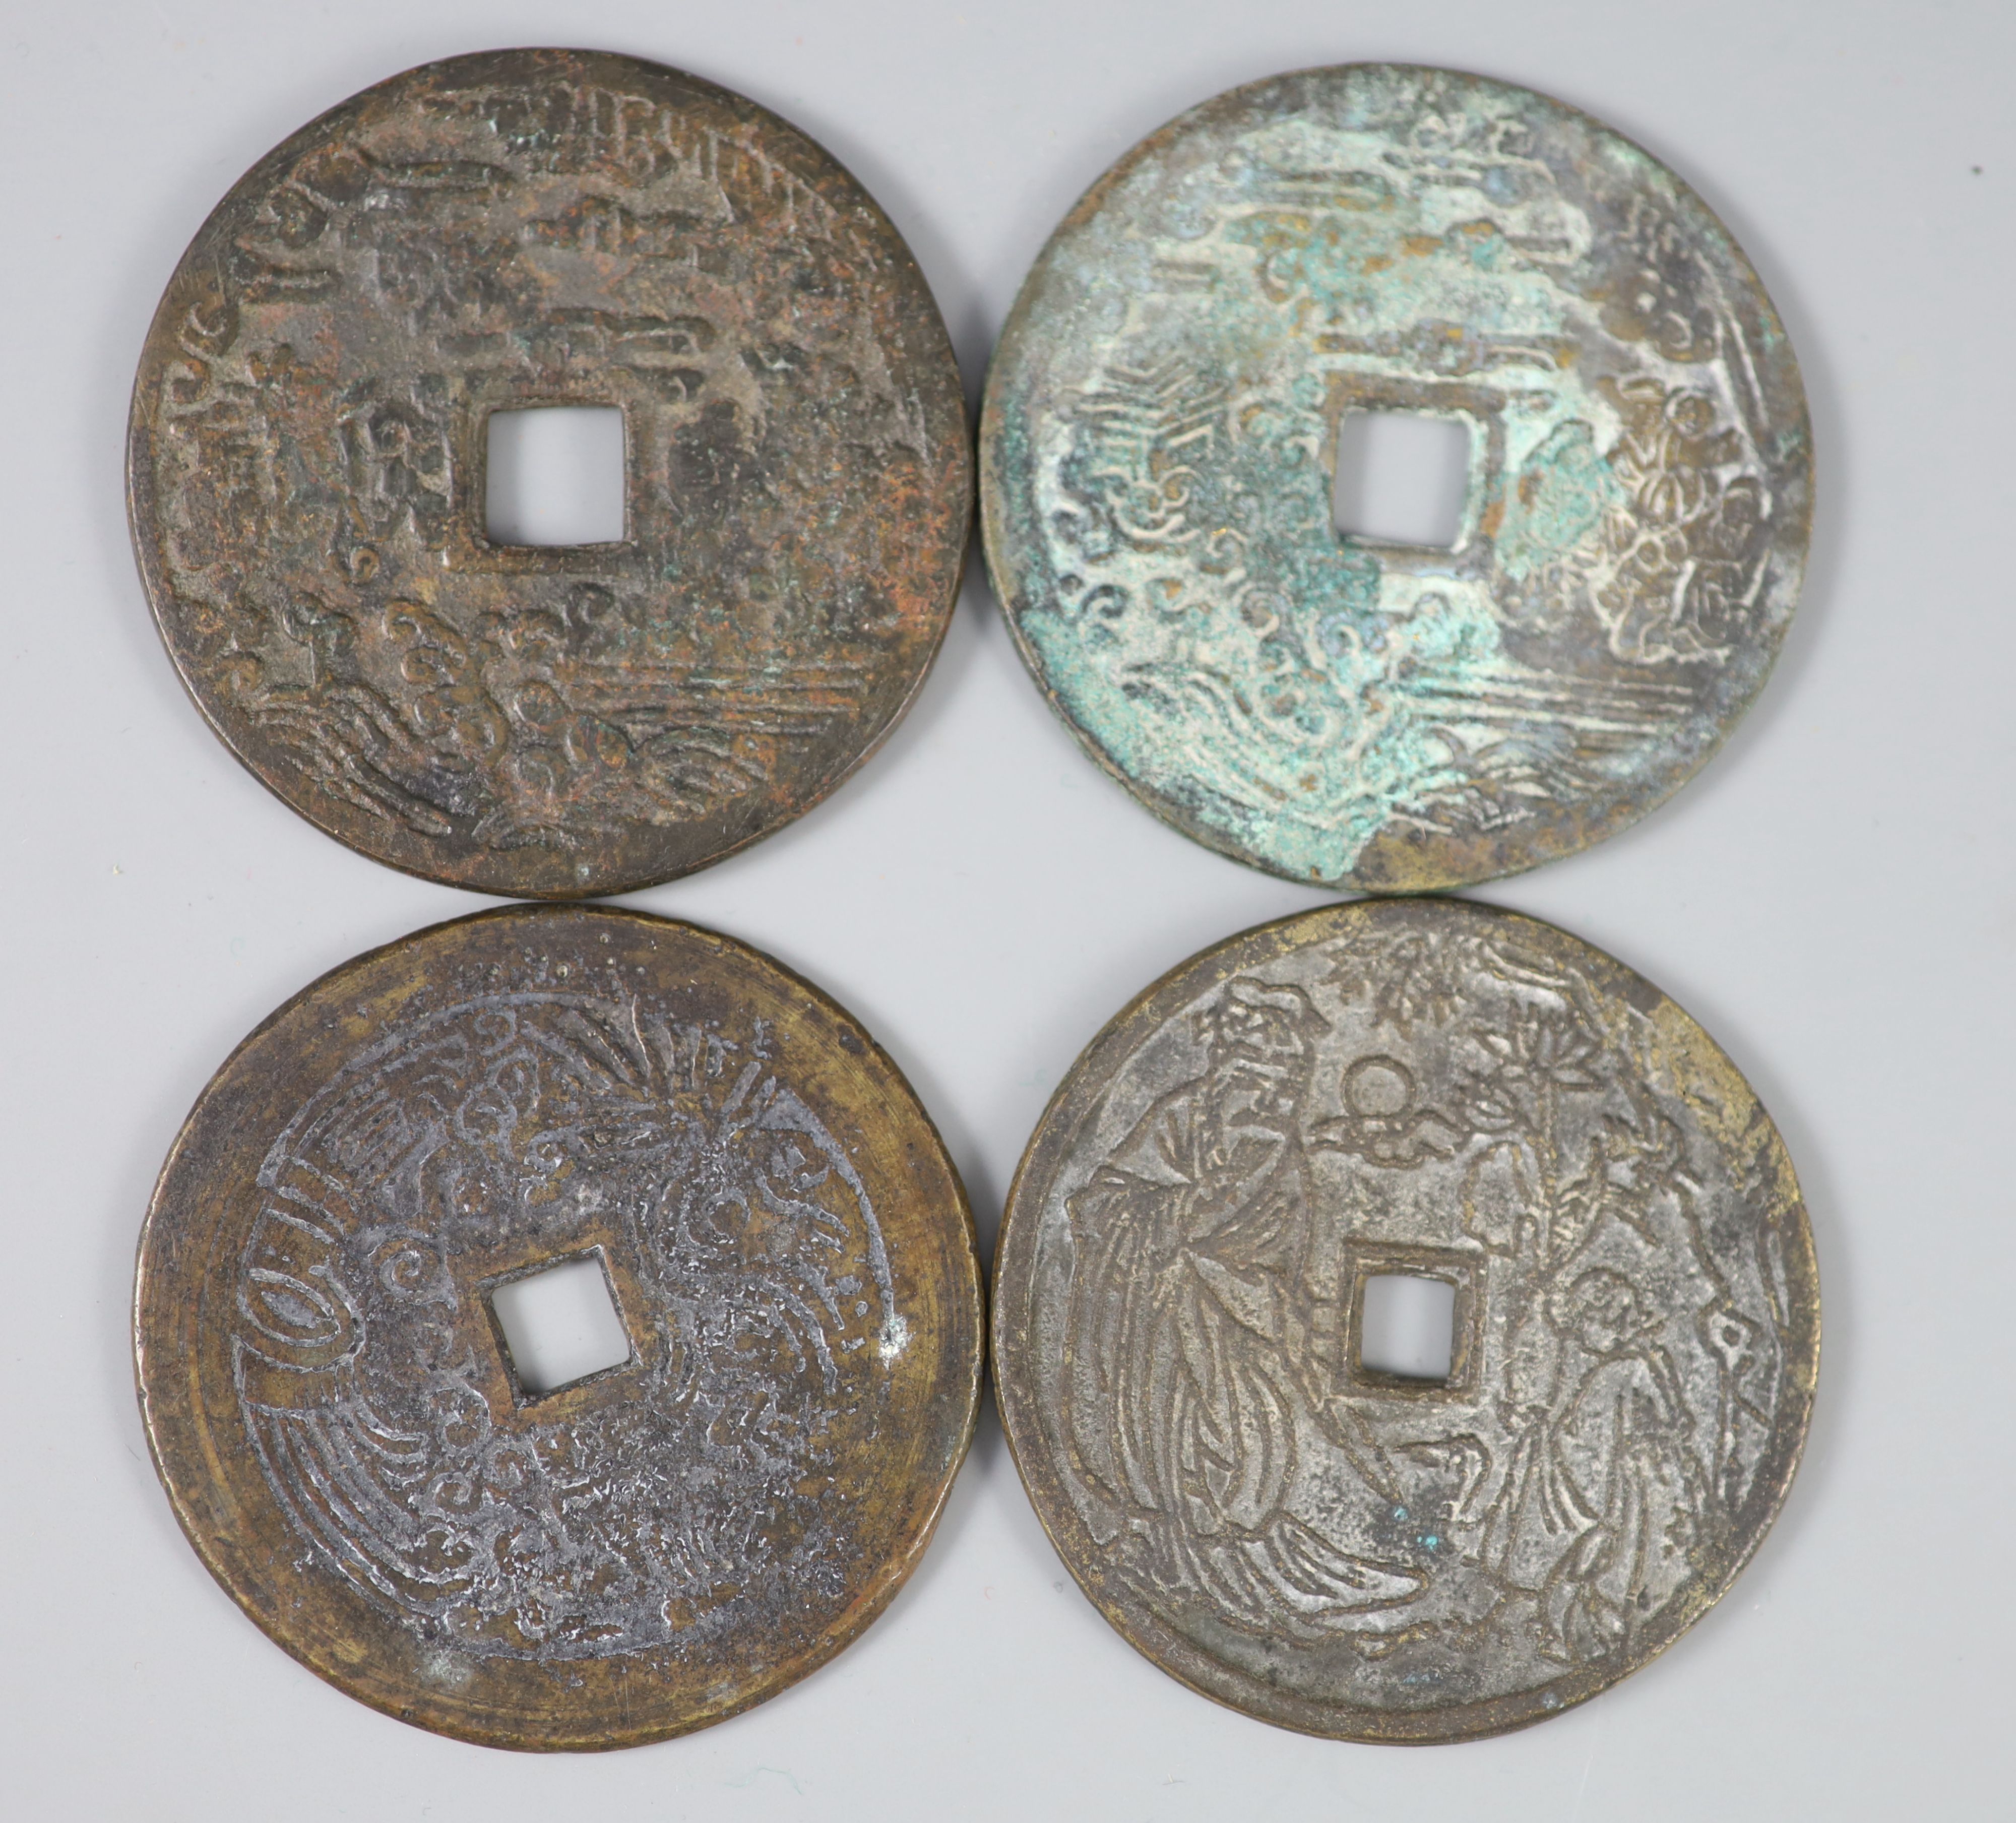 China, 4 large bronze charms or amulets, Qing dynasty,